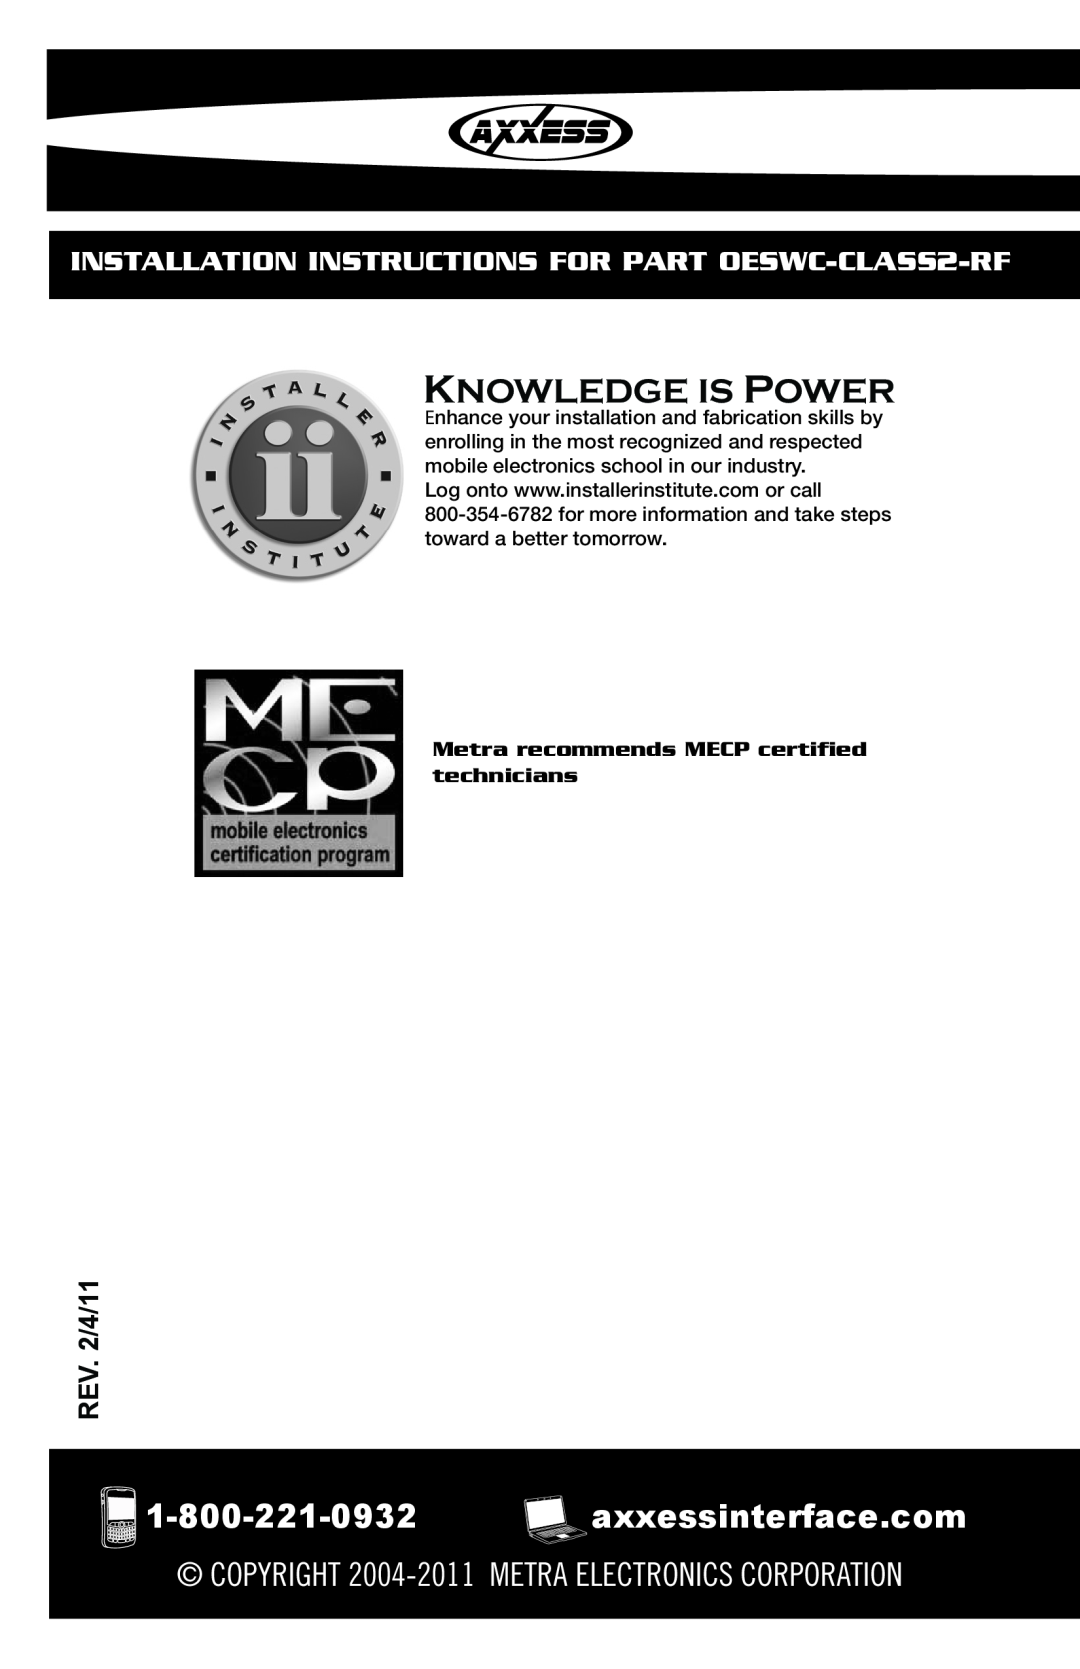 Axxess Interface Knowledge Is Power, INSTALLATION INSTRUCTIONS FOR PART OESWC-CLASS2-RF, REV. 2/4/11 